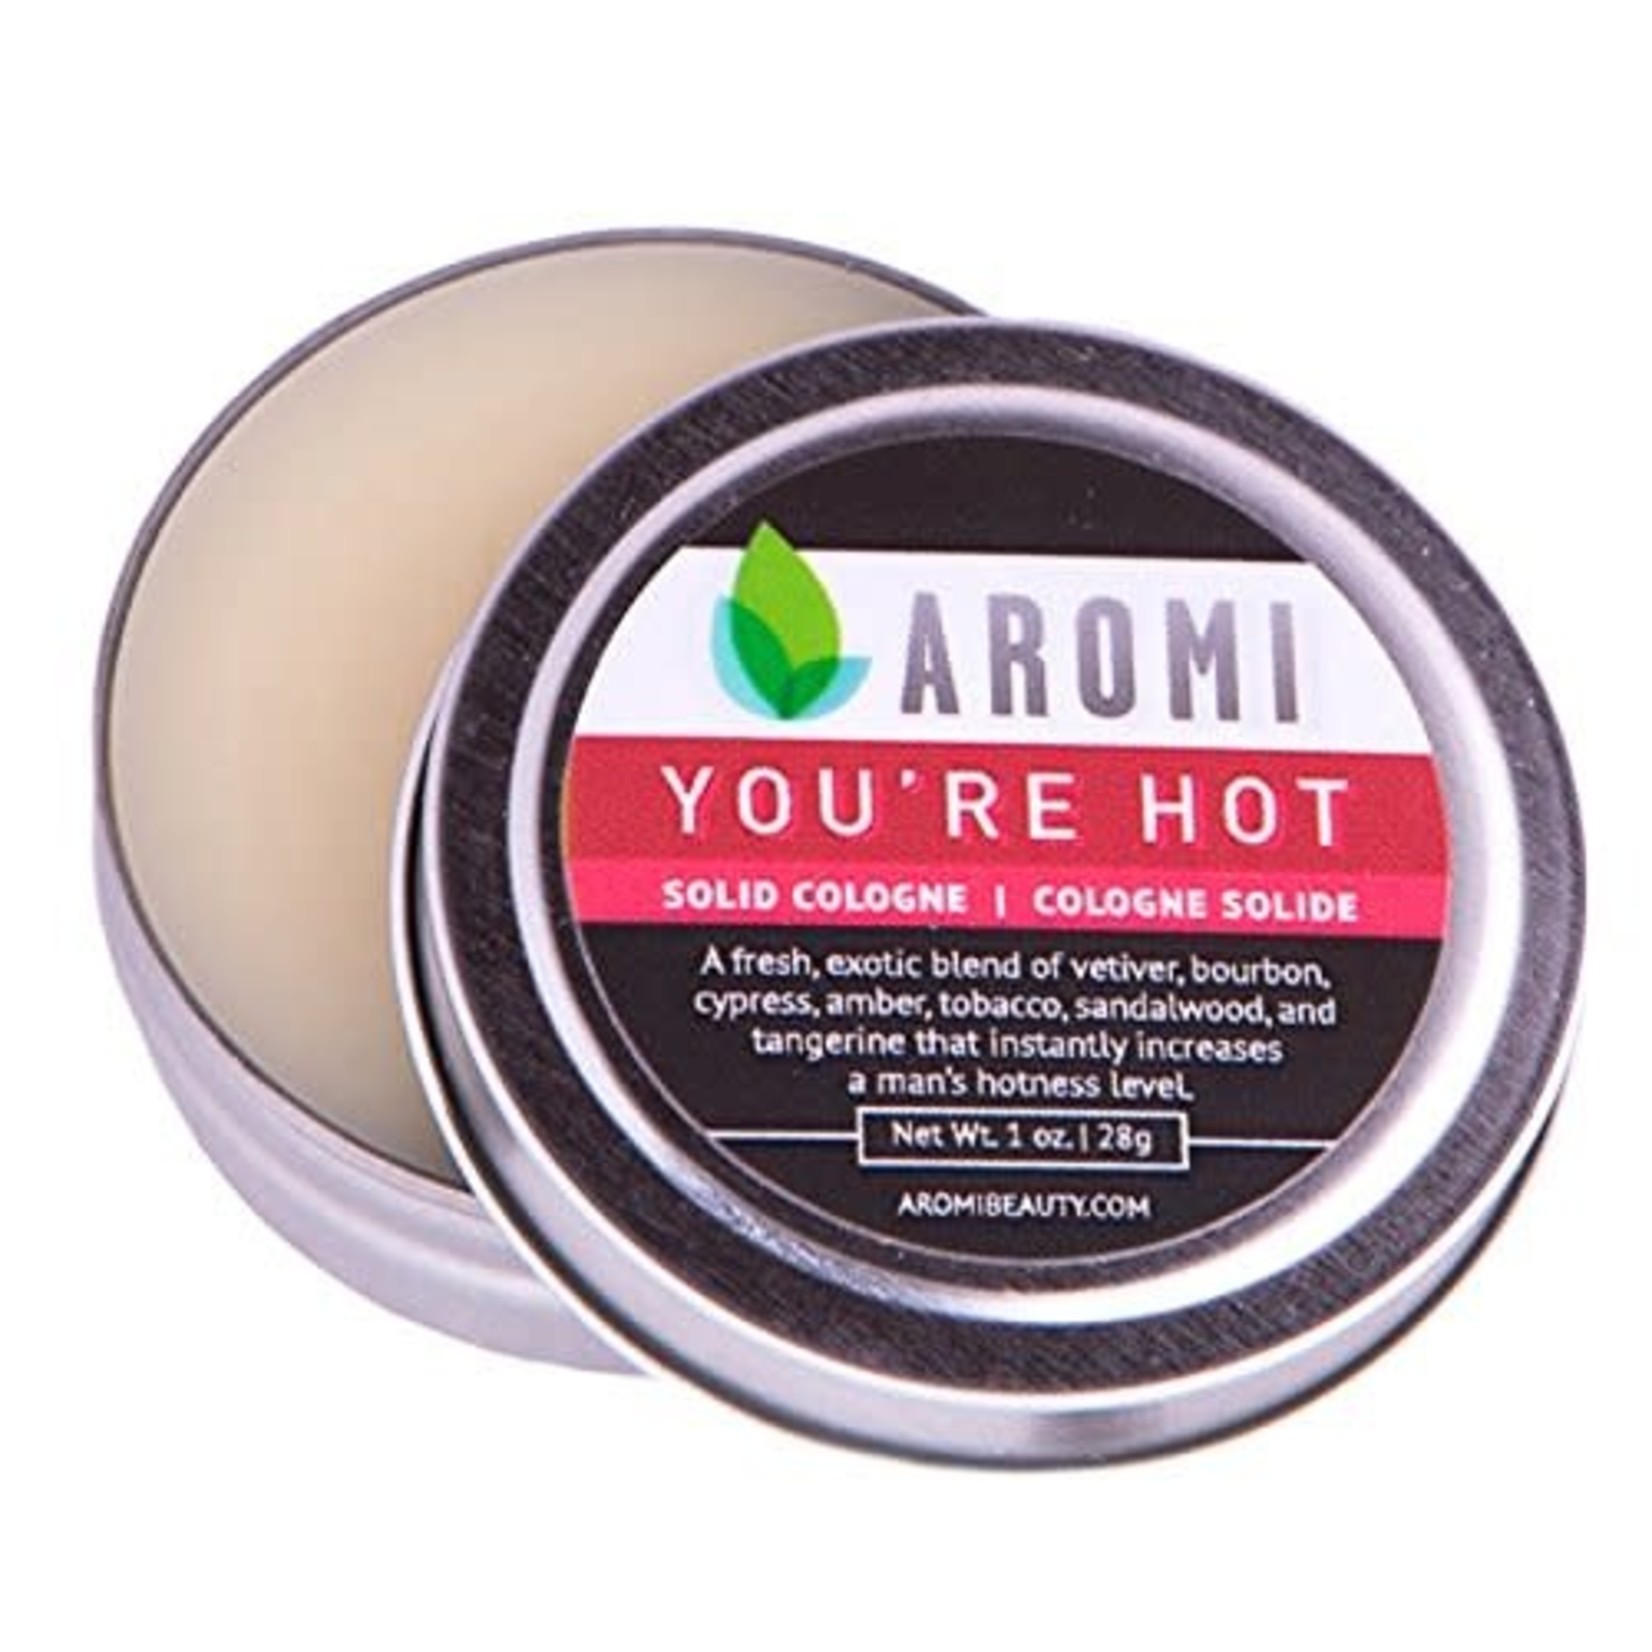 Aromi You're Hot Solid Cologne